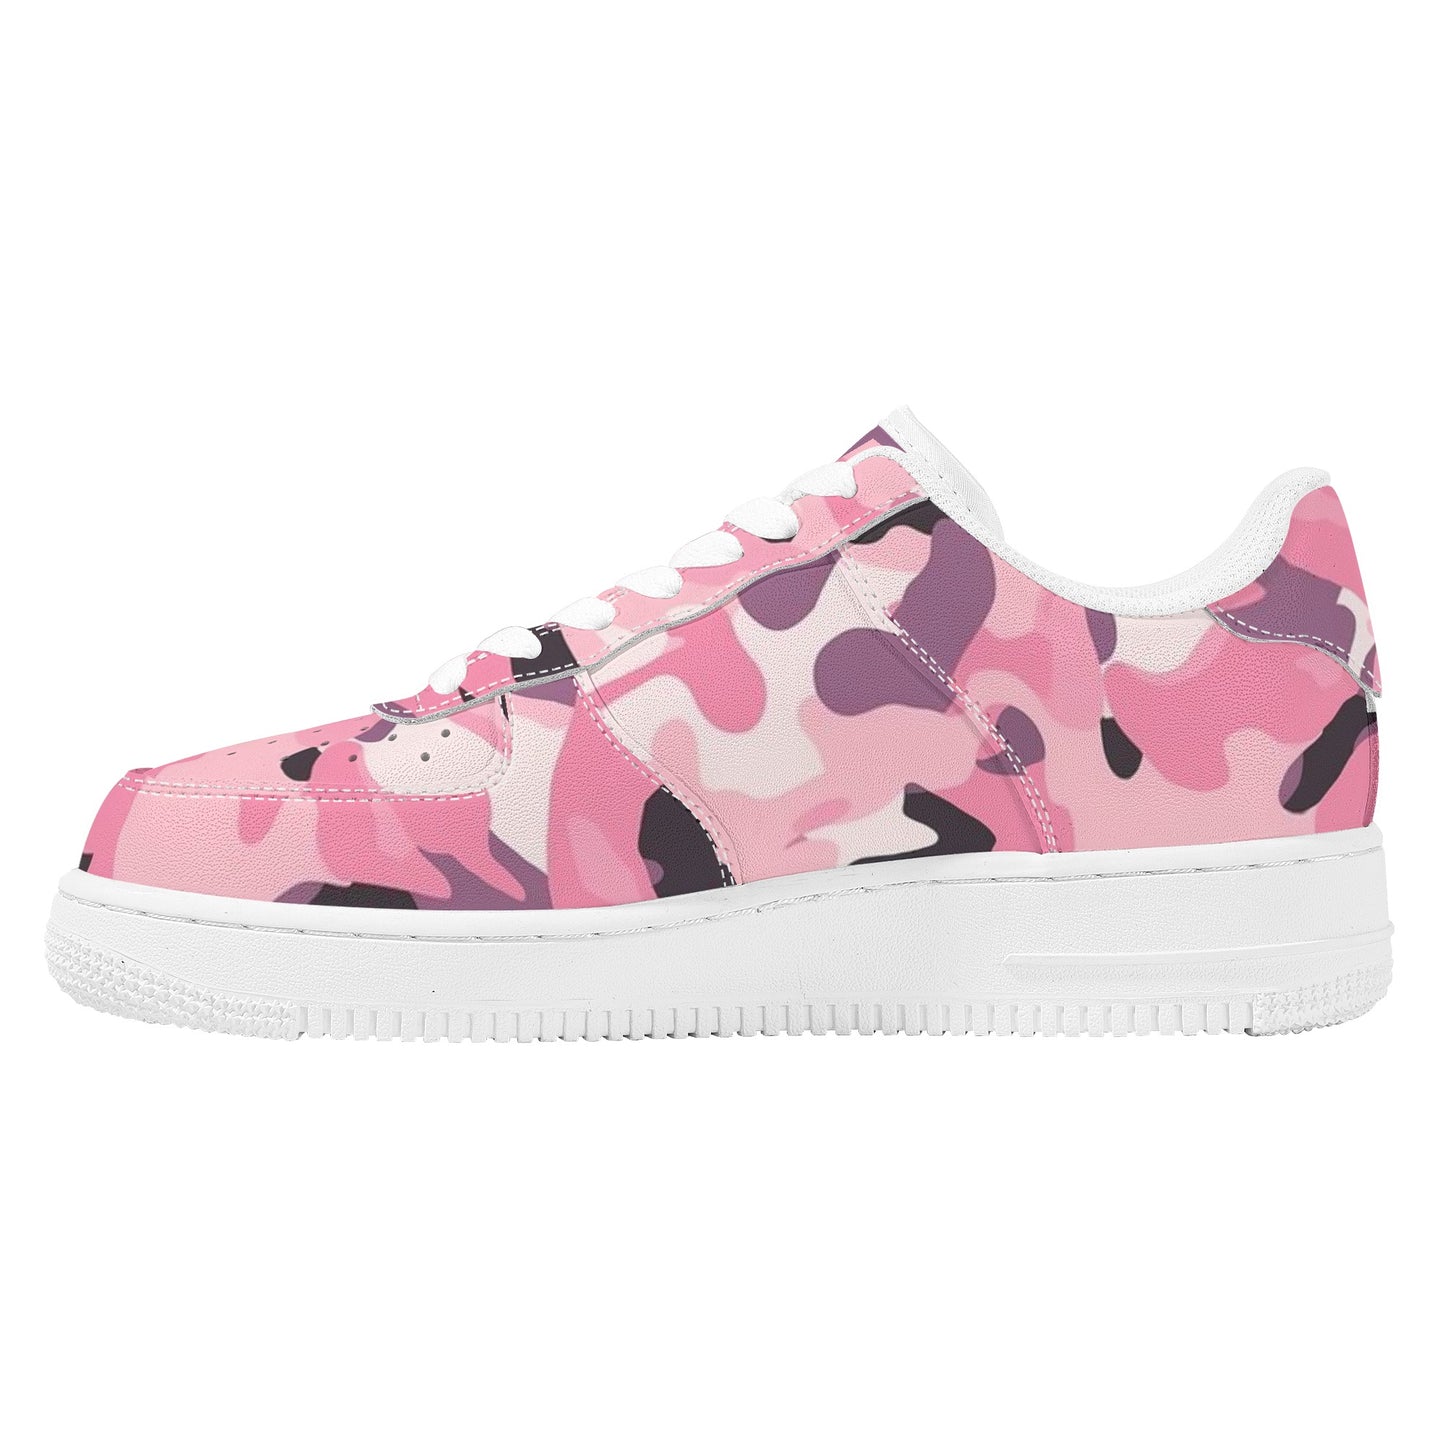 Pink Camo Women Vegan Leather Shoes, Camouflage Sneakers White Low Top Lace Up Custom Girls Aesthetic Flat Ladies Starcove Fashion